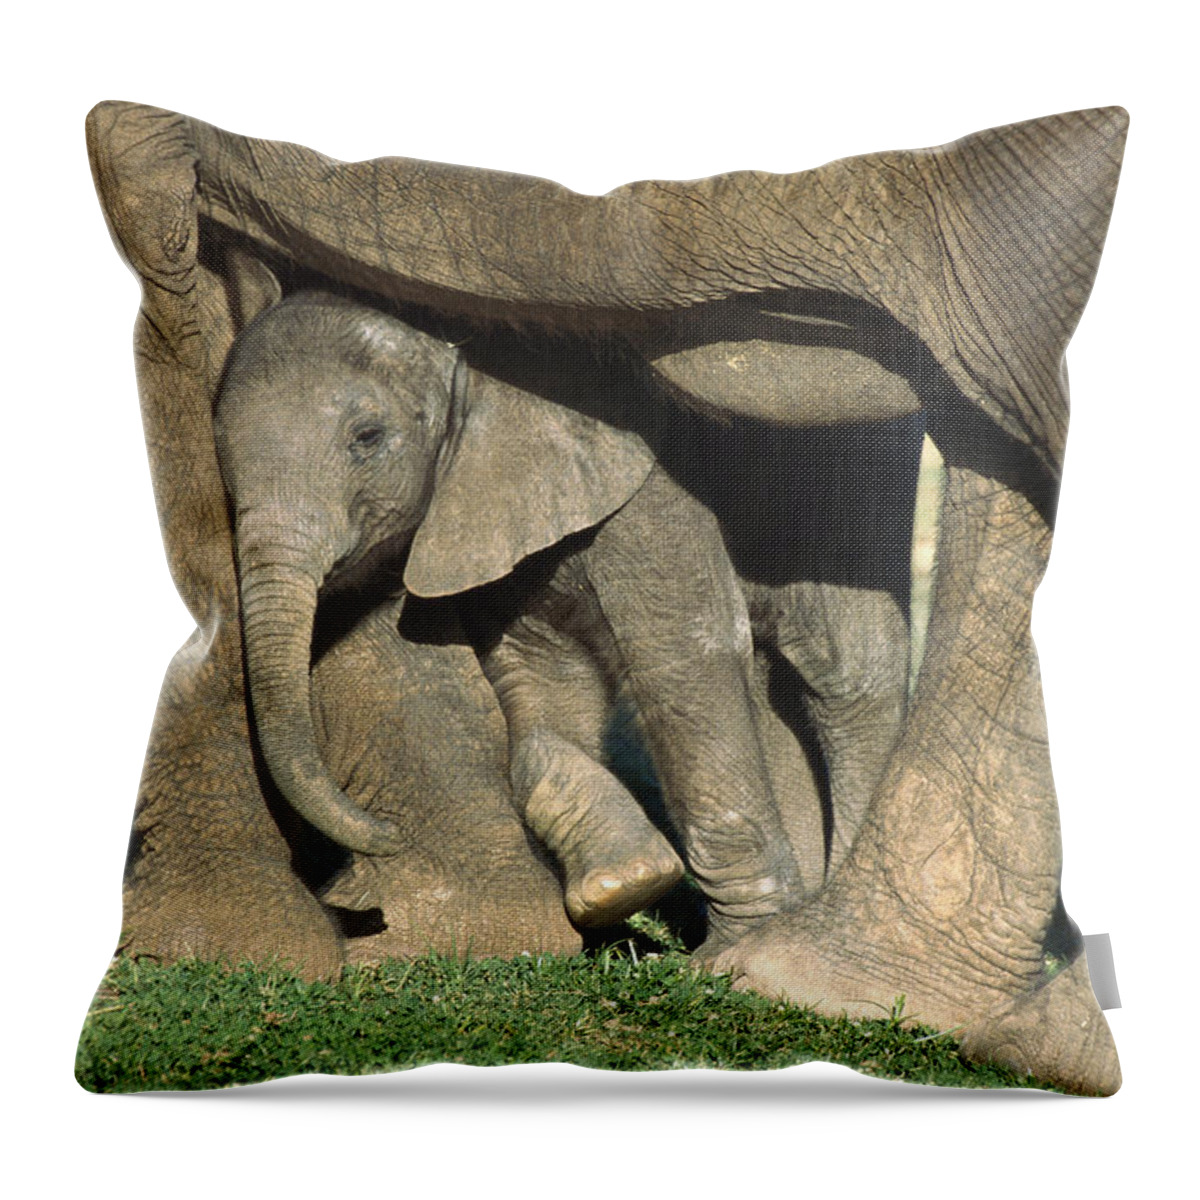 Affection Throw Pillow featuring the photograph African Elephant Loxodonta Africana by San Diego Zoo